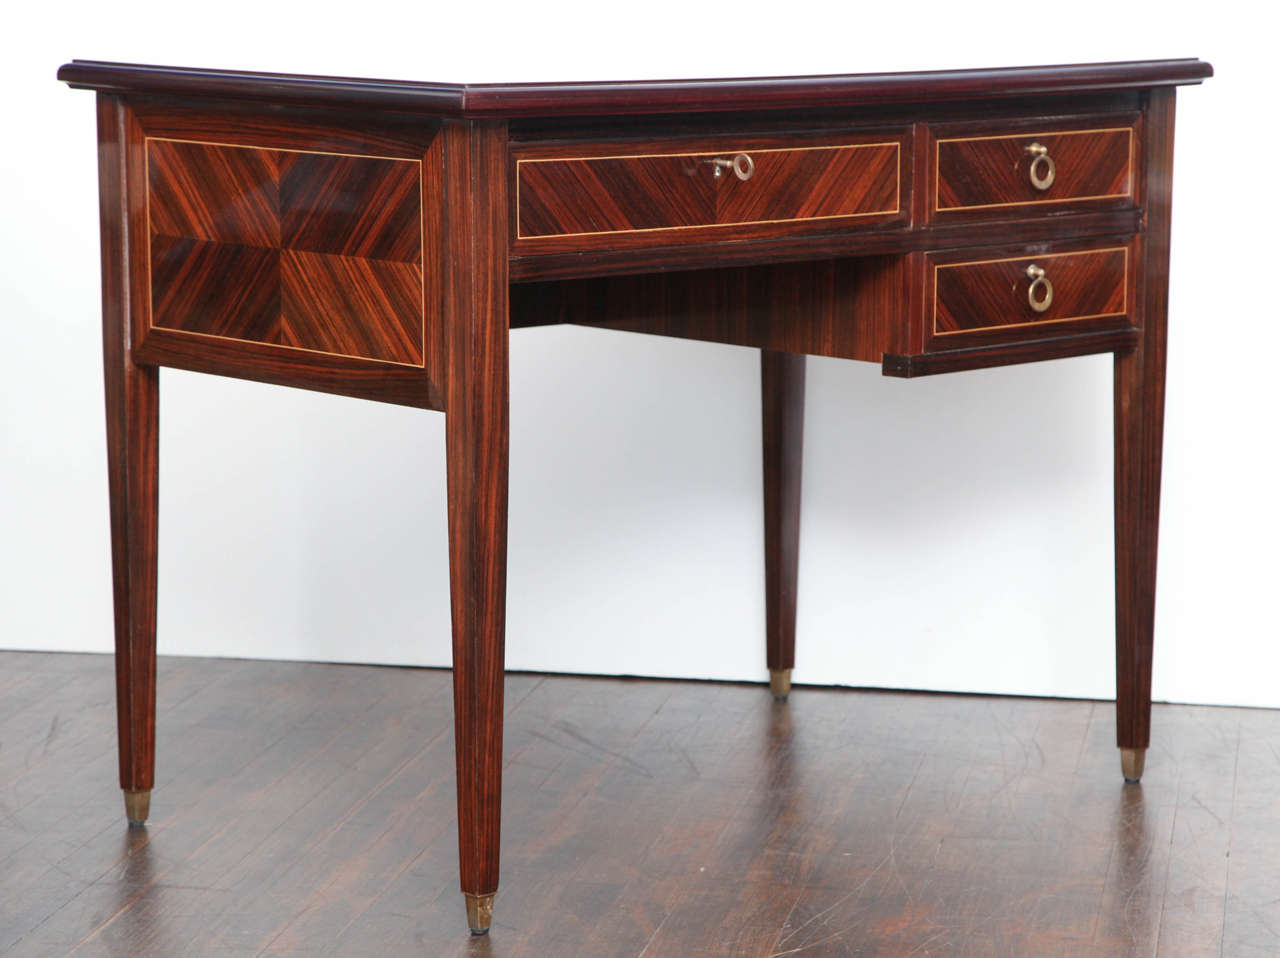 Elegant desk of rosewood veneers, with book matched details and light wood inlays.  Classic and modern form with brass pulls and sabots.  Finished on all sides.